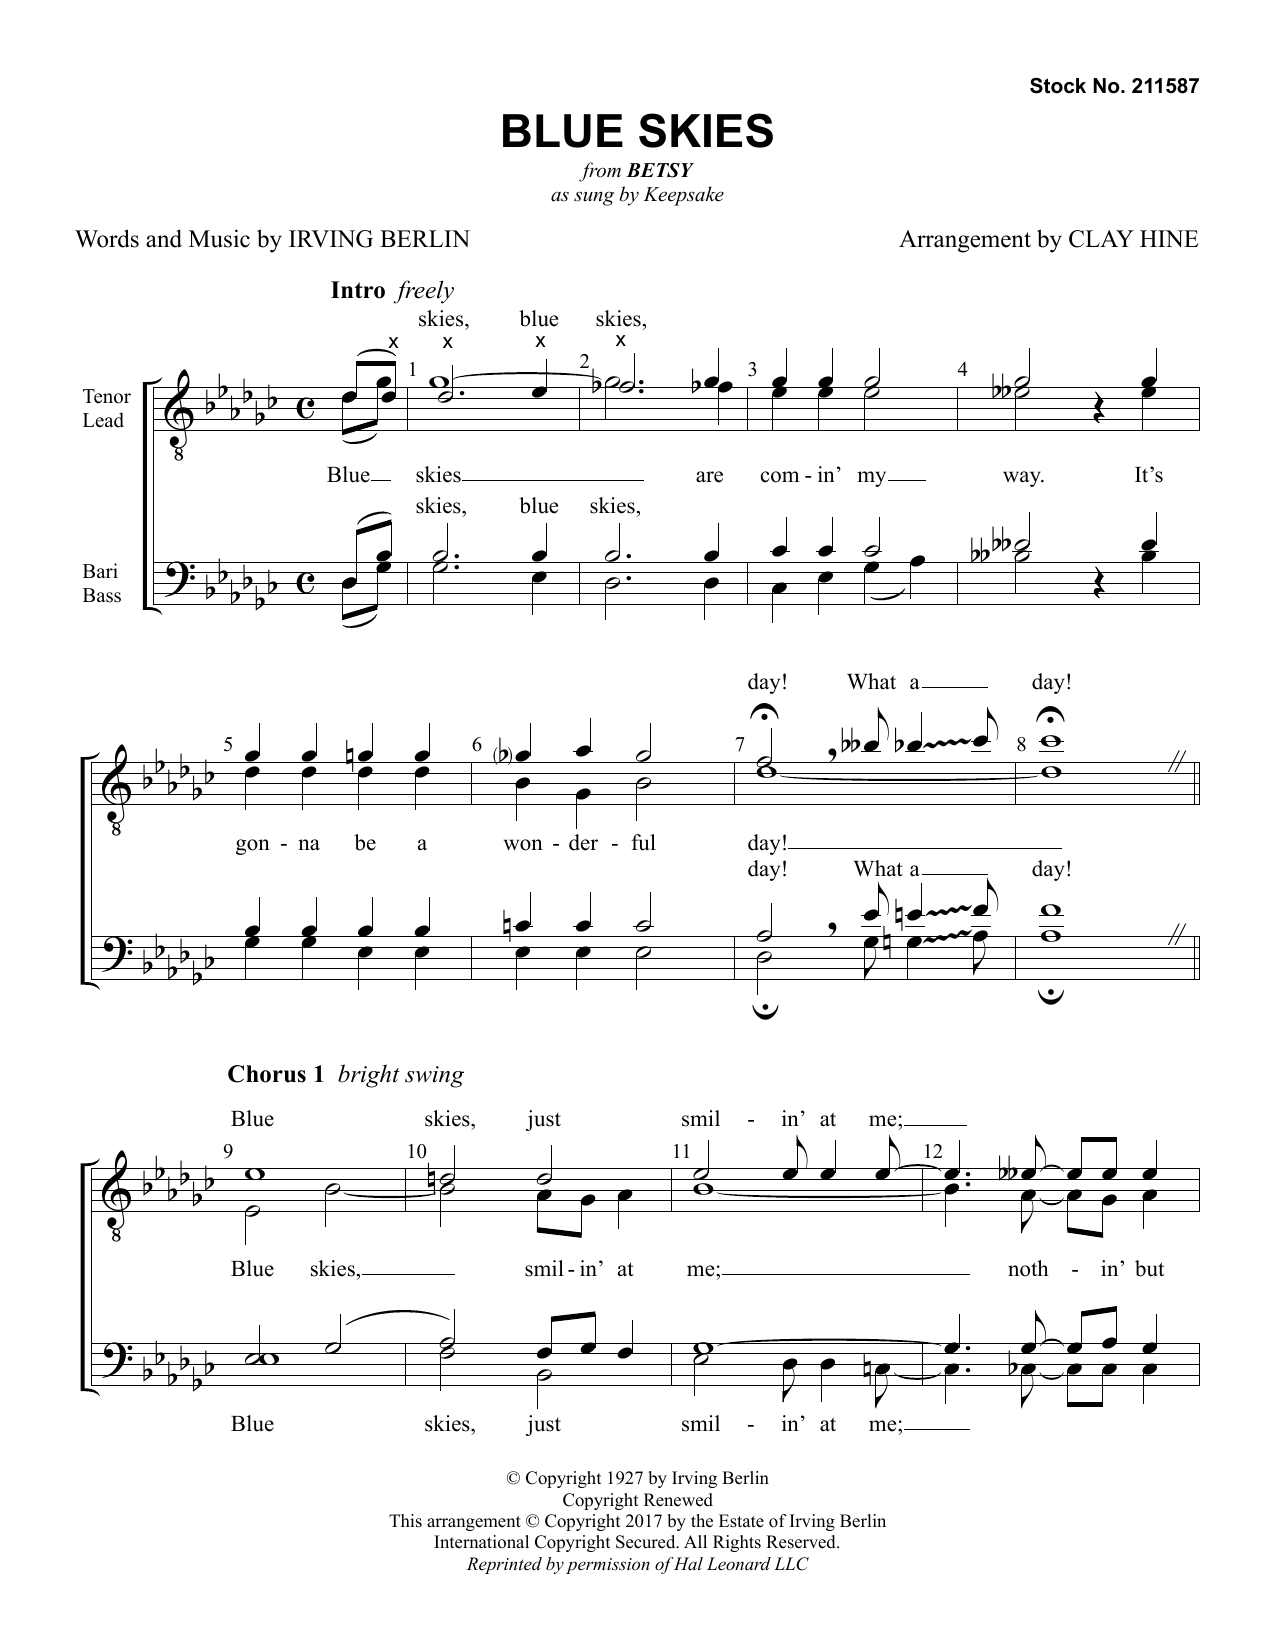 Download Keepsake Blue Skies (from Betsy) (arr. Clay Hine Sheet Music